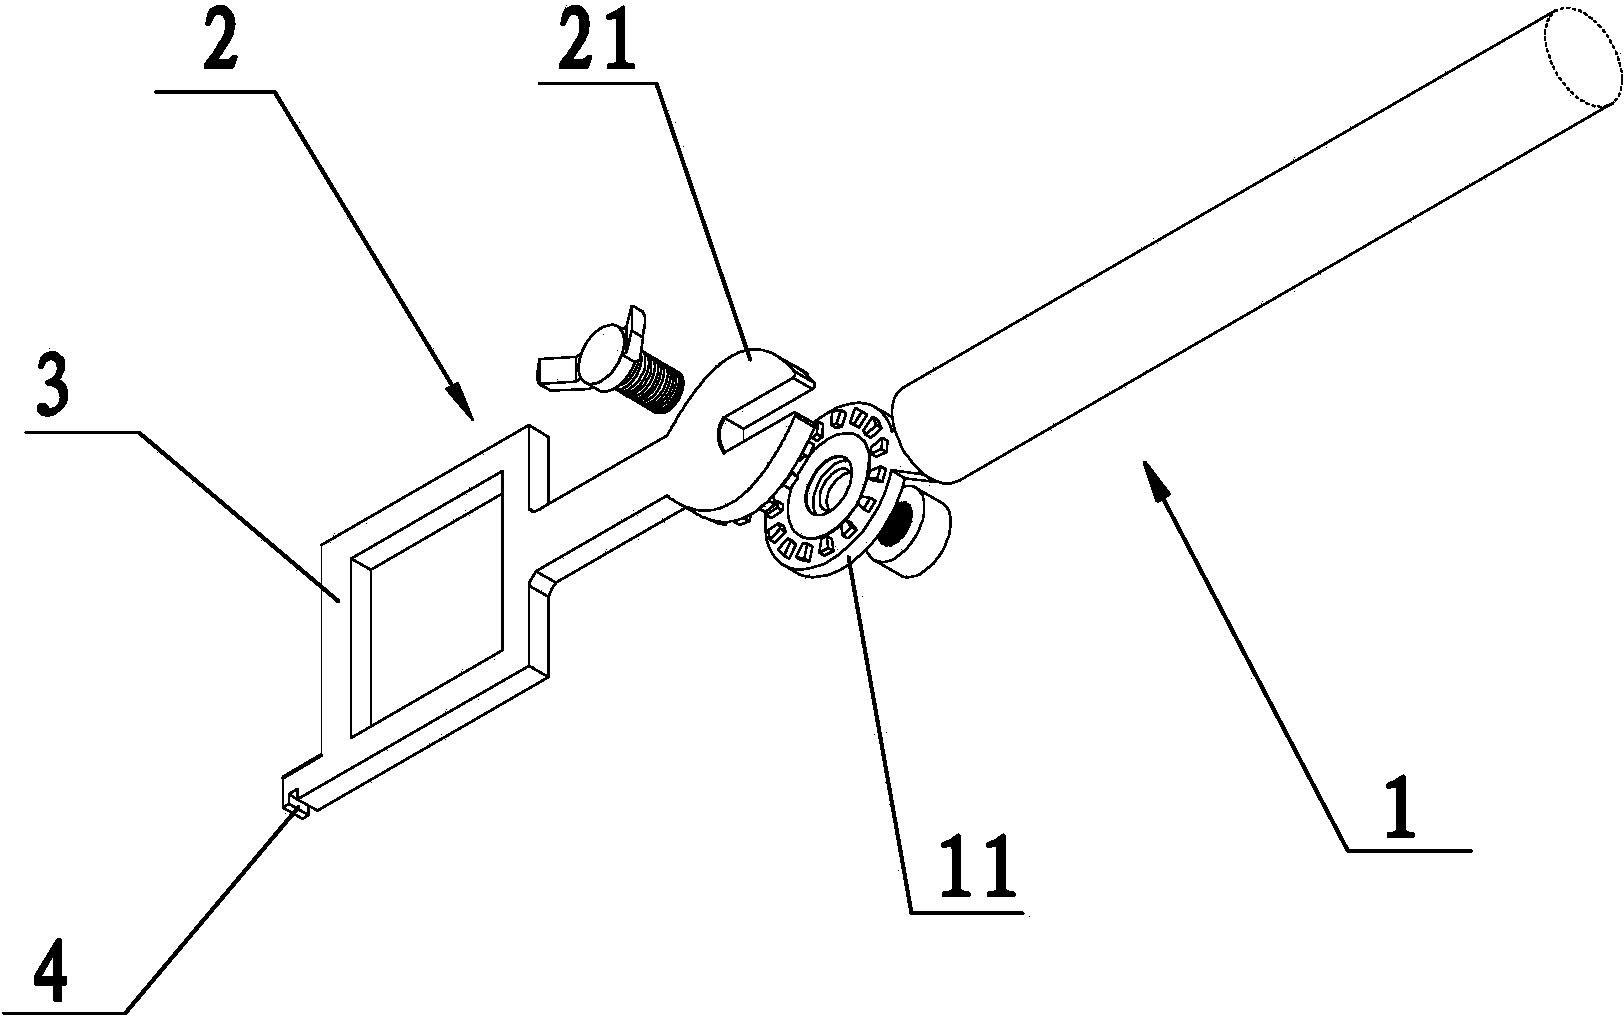 Fitting bolt ground potential assembling and disassembling combination tool